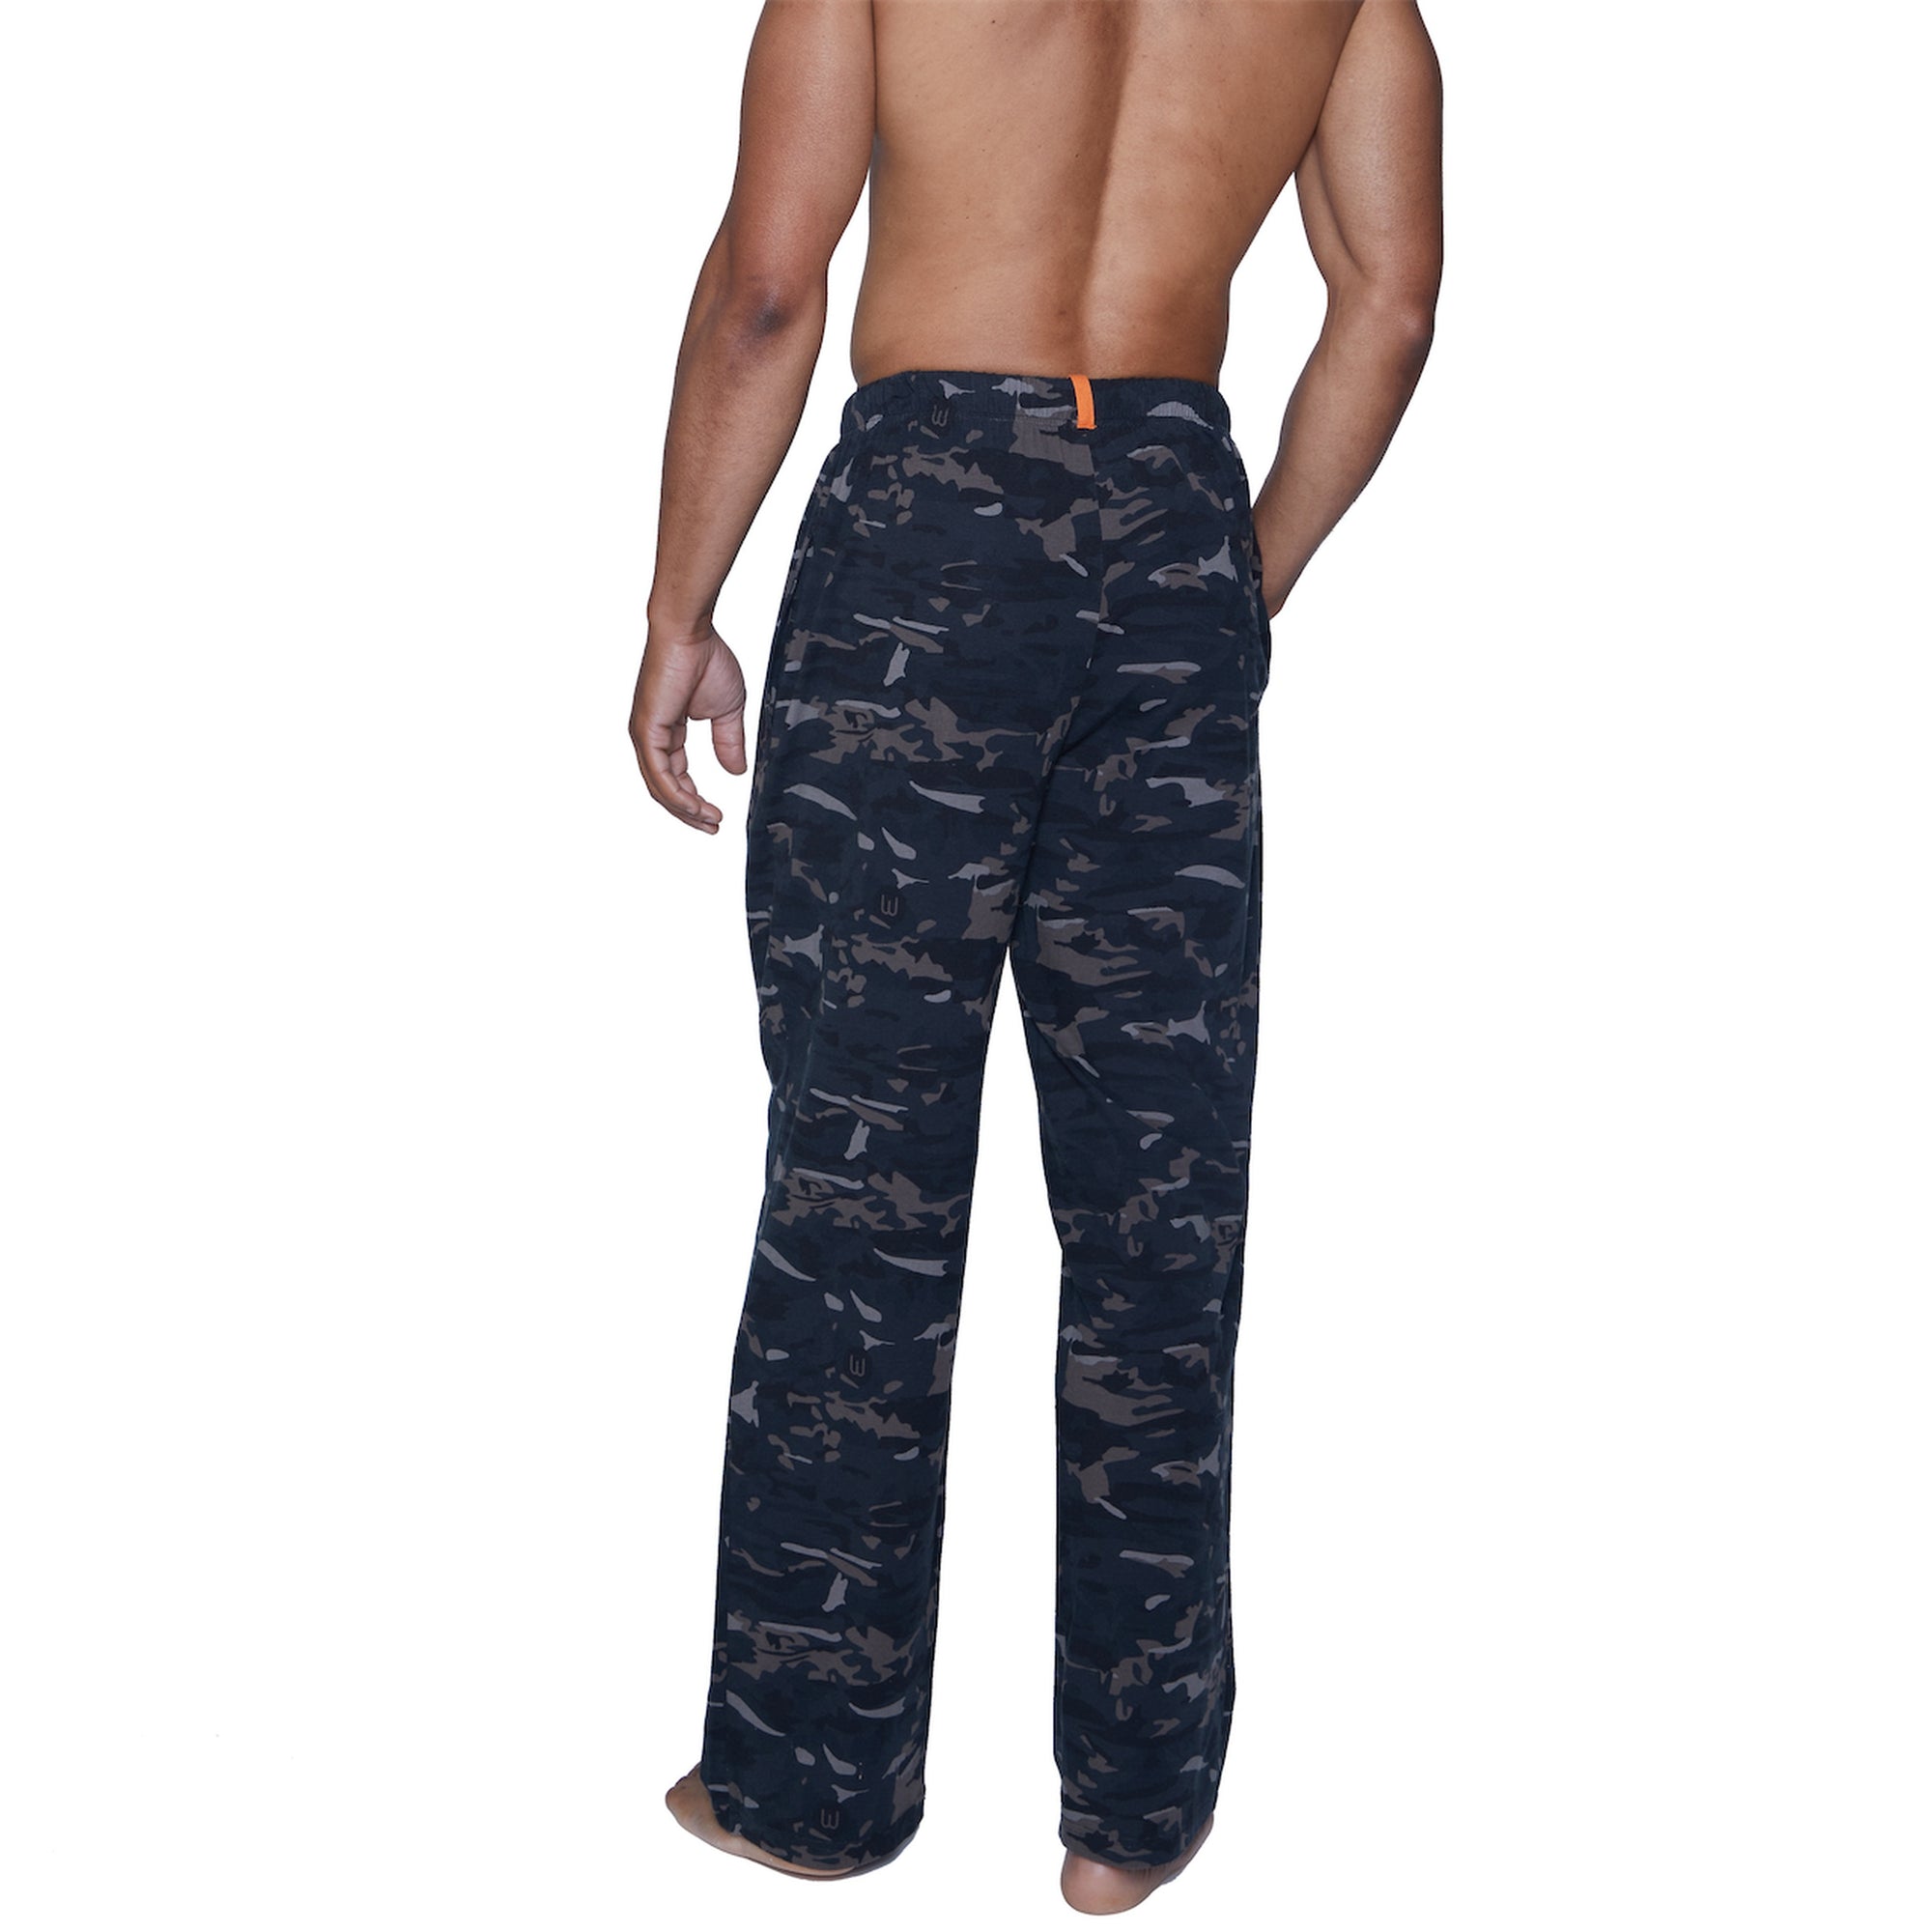 Lounge Pant with Draw String in Forest Camo by Wood Underwear